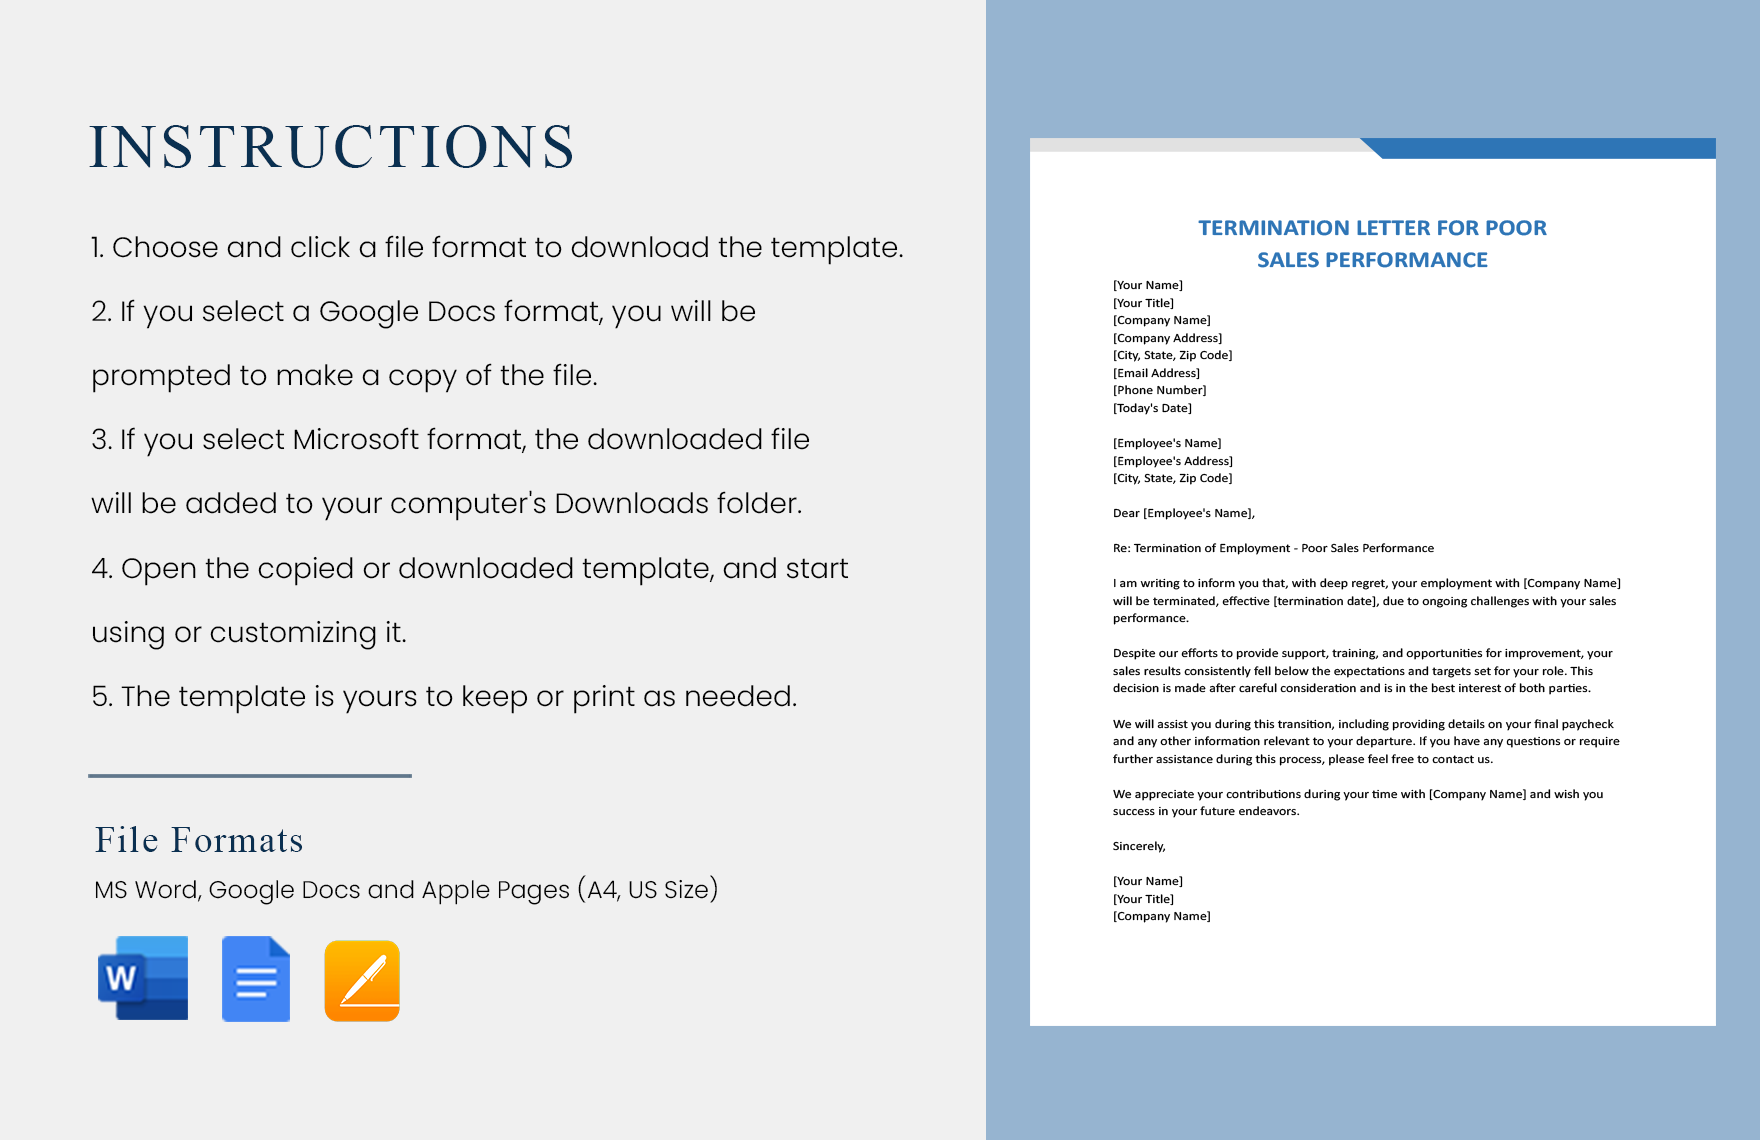 Termination Letter For Poor Sales Performance